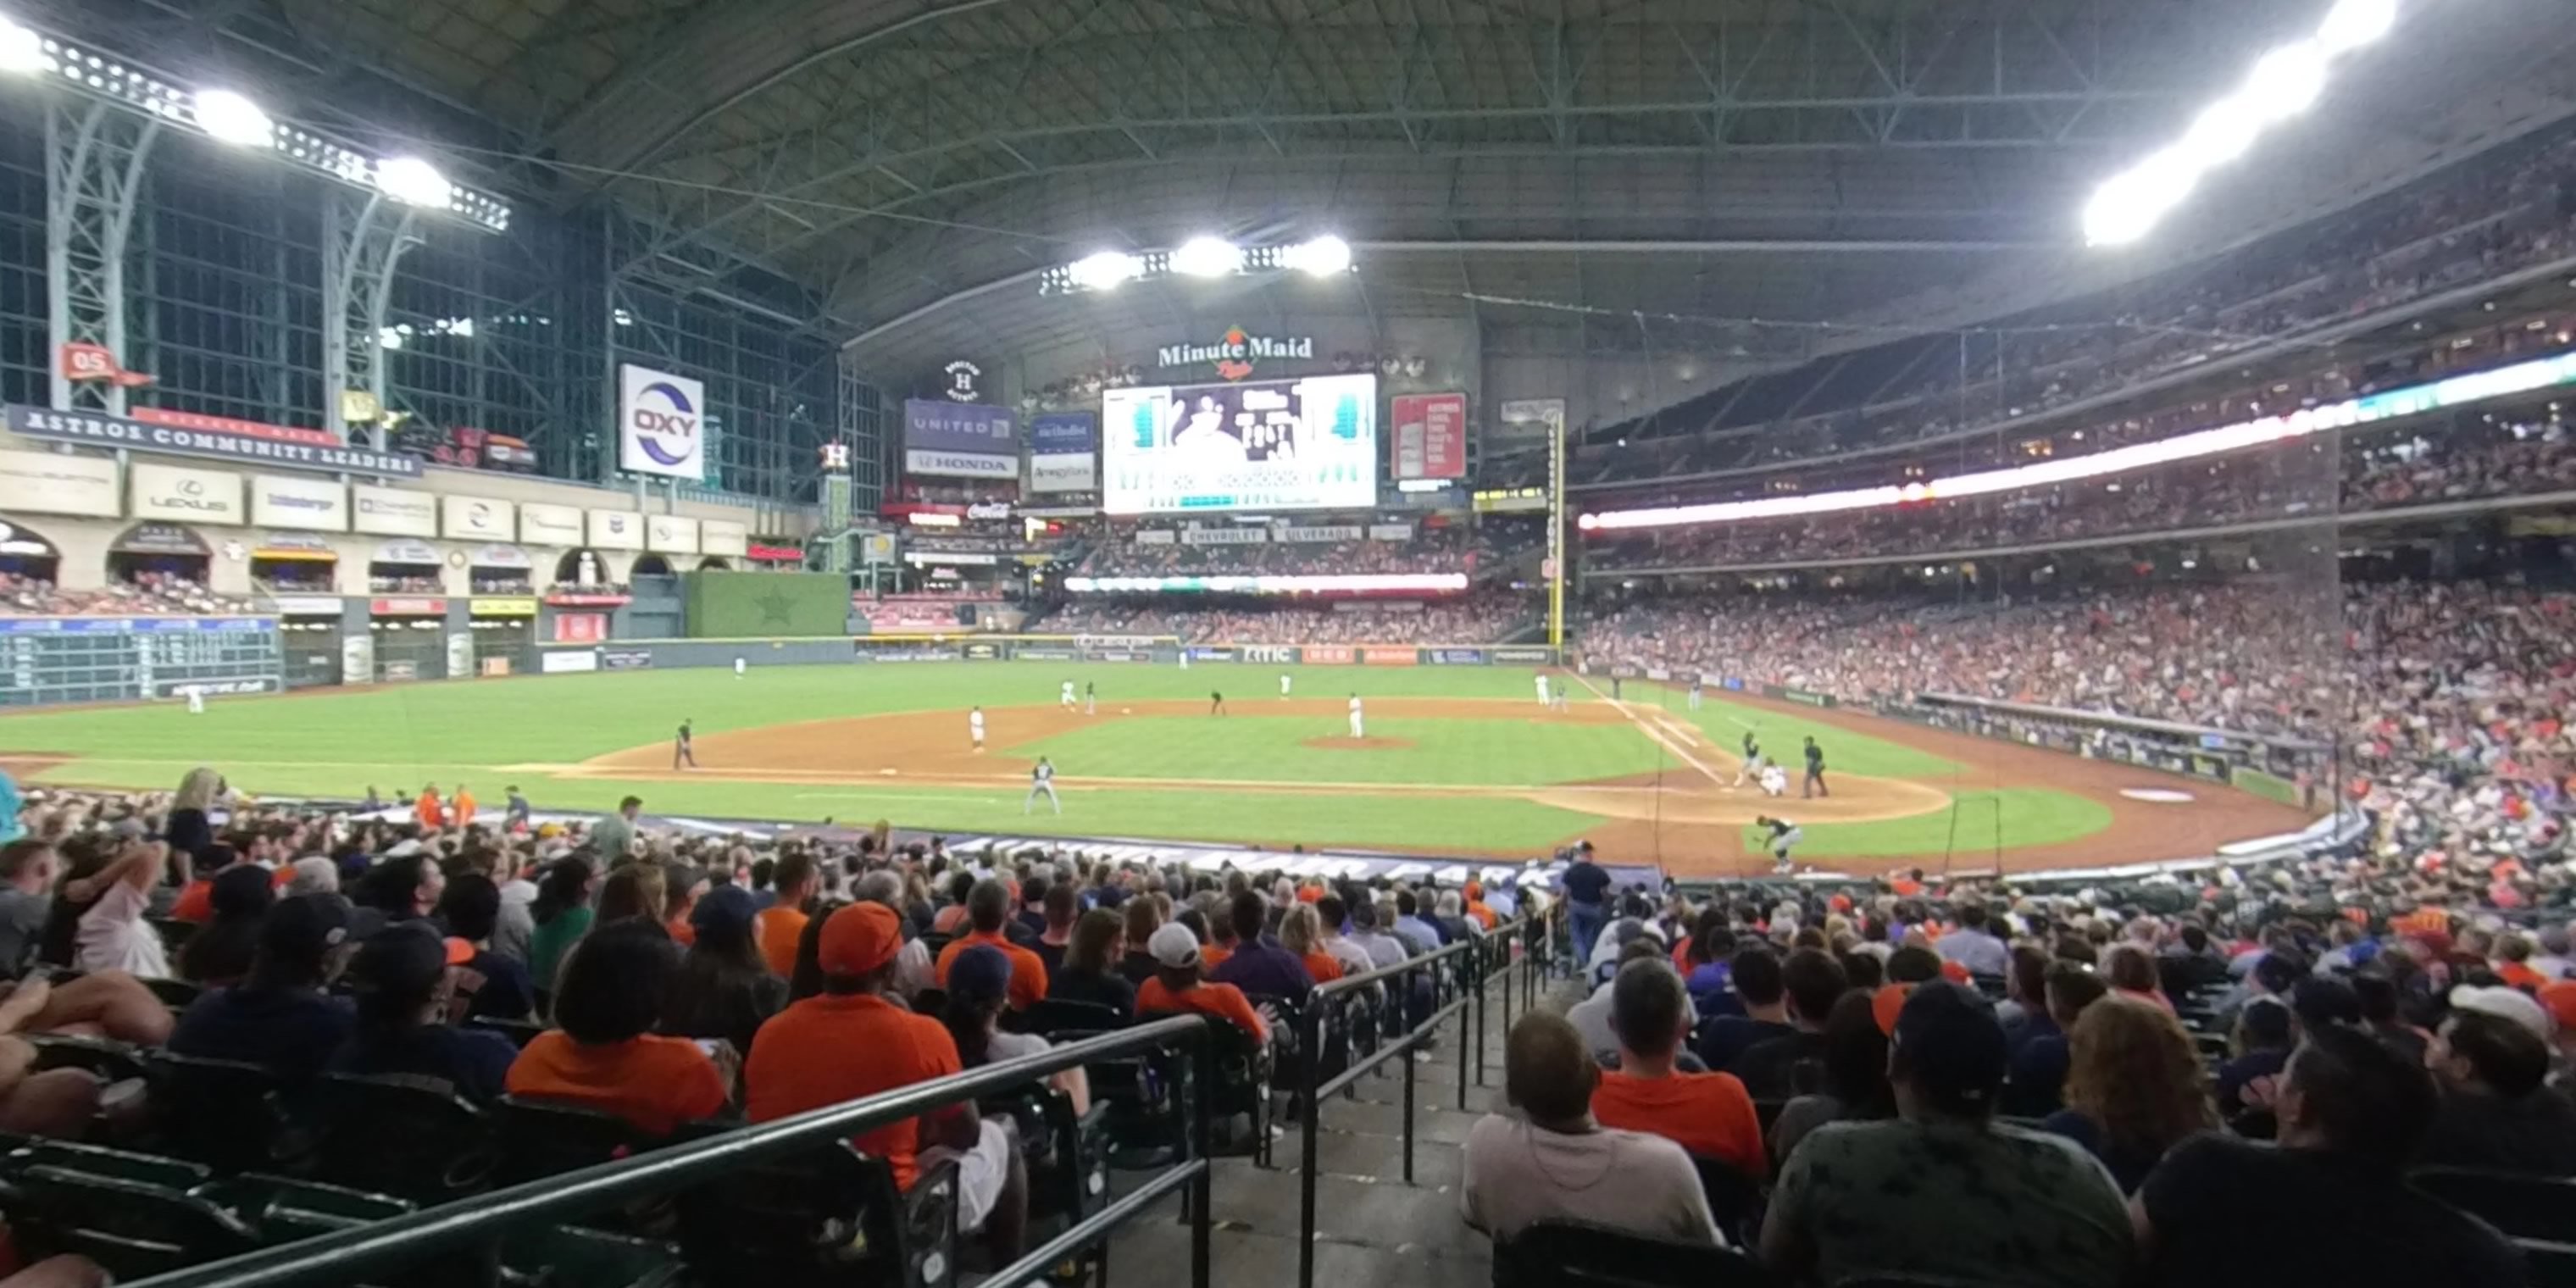 Section 116 At Minute Maid Park